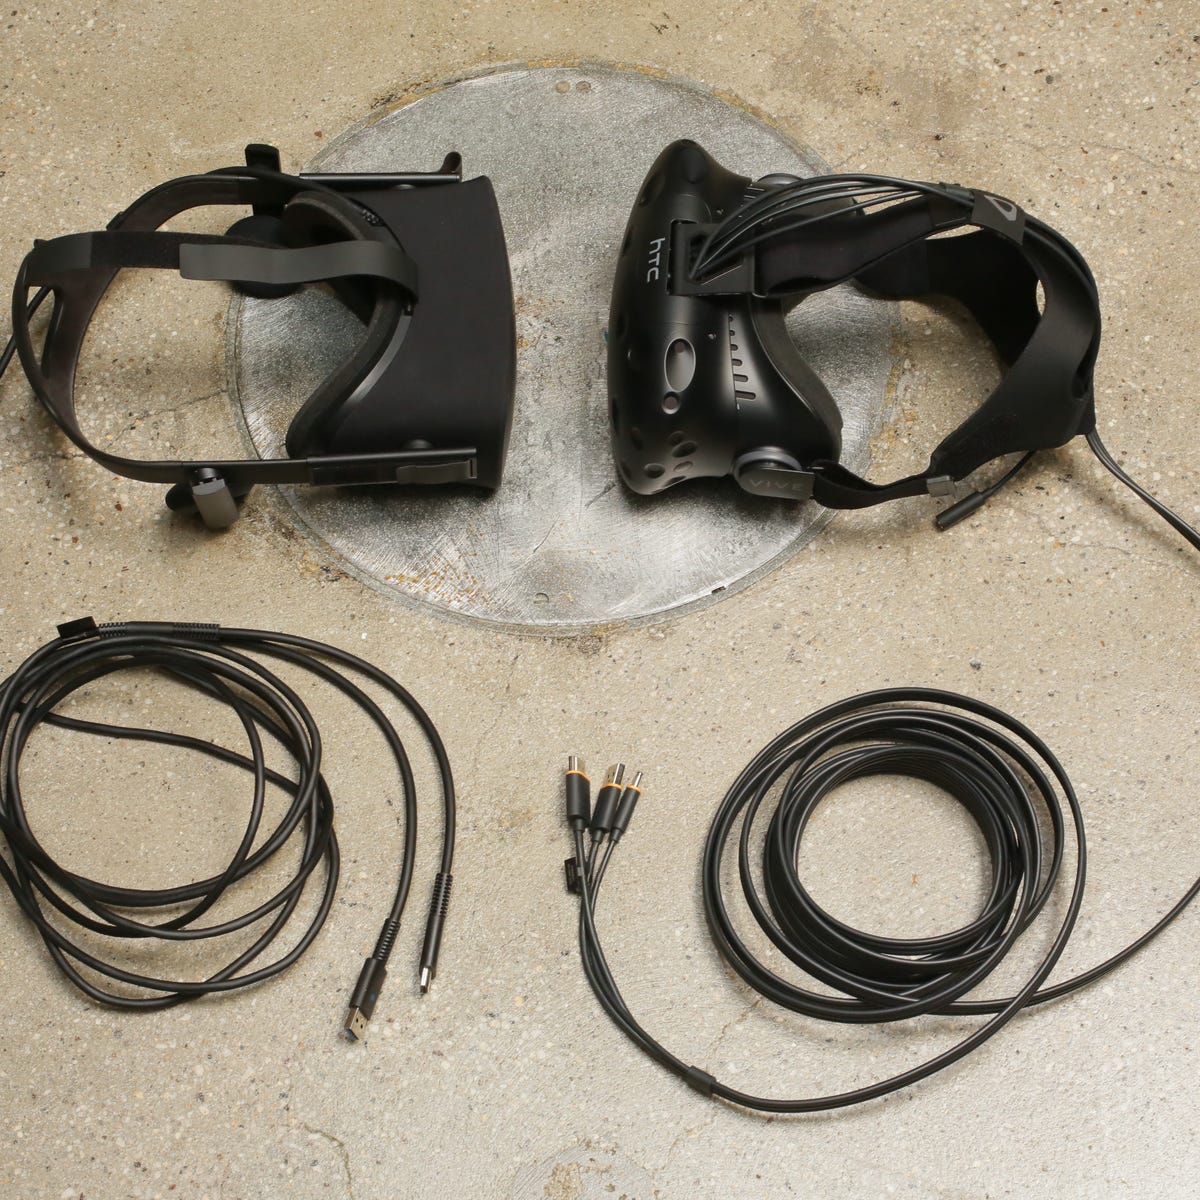 How to keep the Oculus Rift or HTC Vive cord out of your way CNET